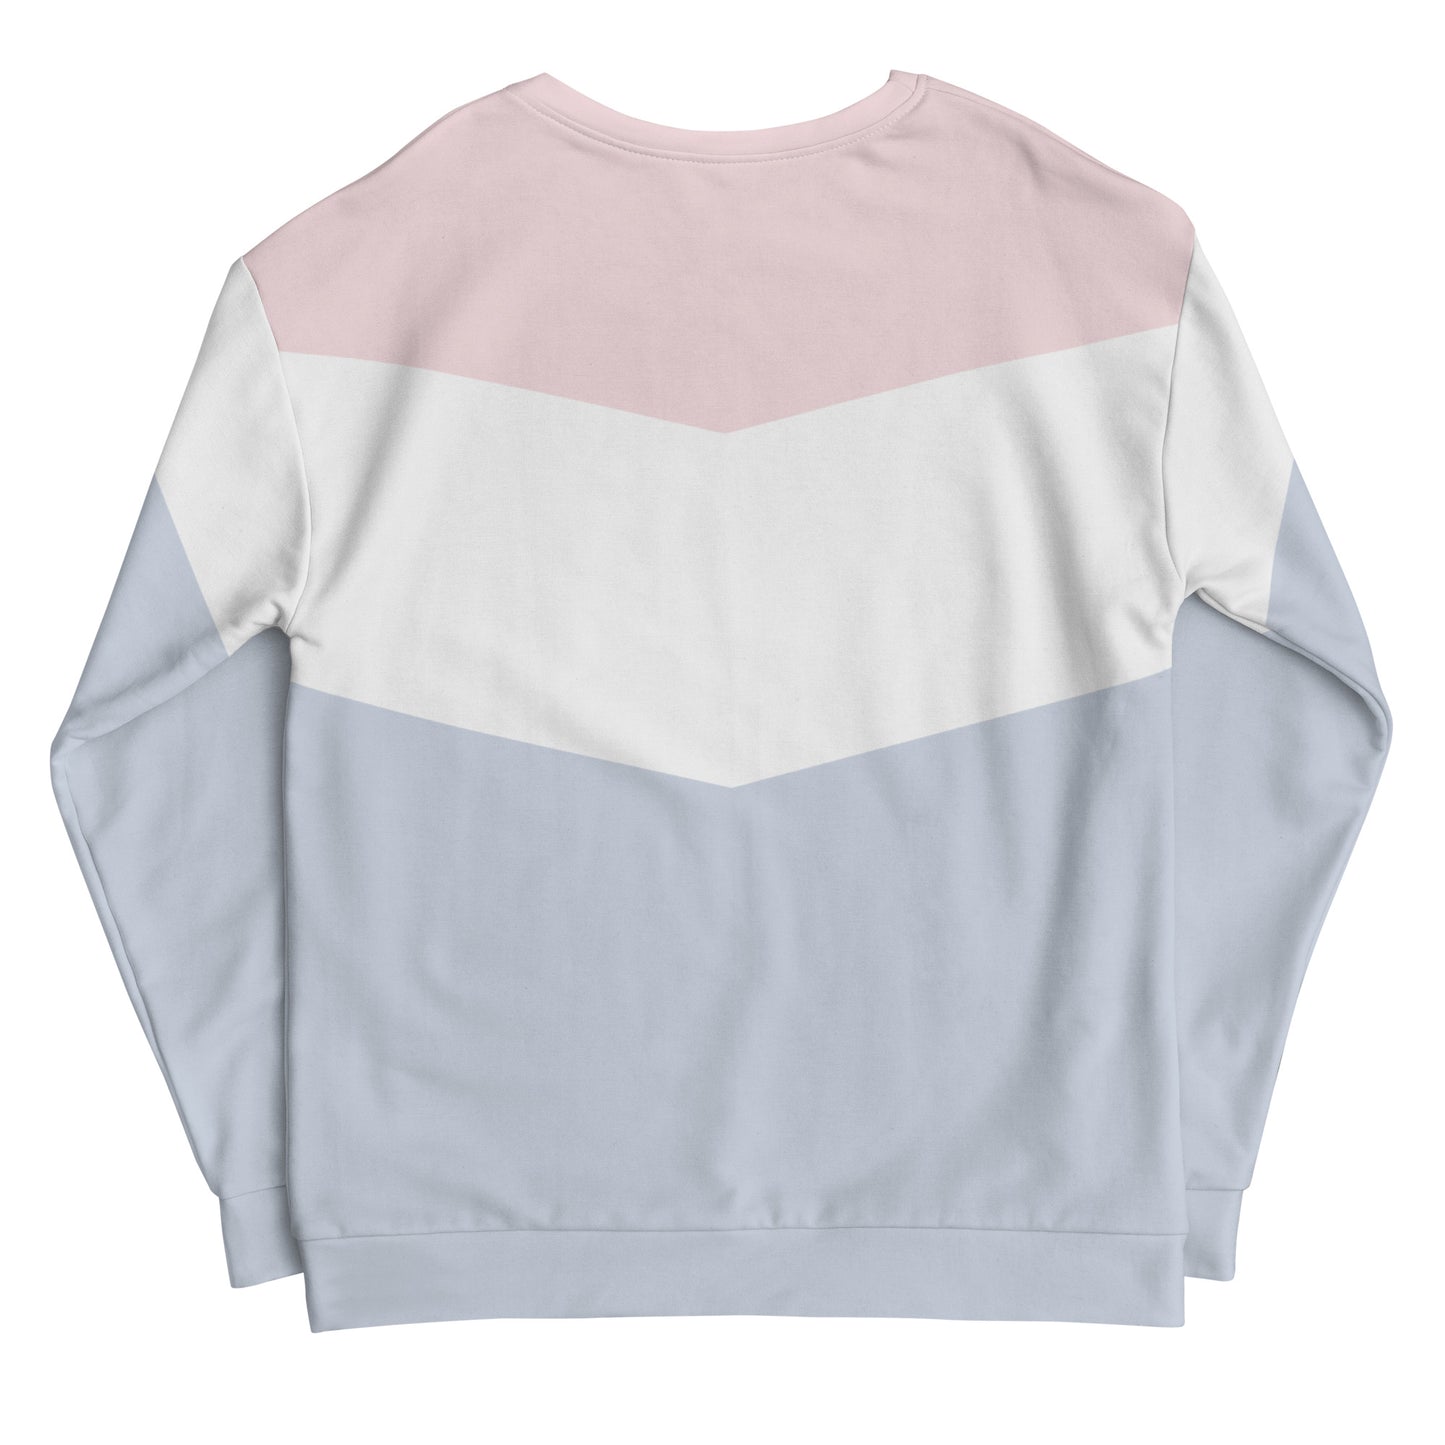 Cool and Calm - Sustainably Made Sweatshirt